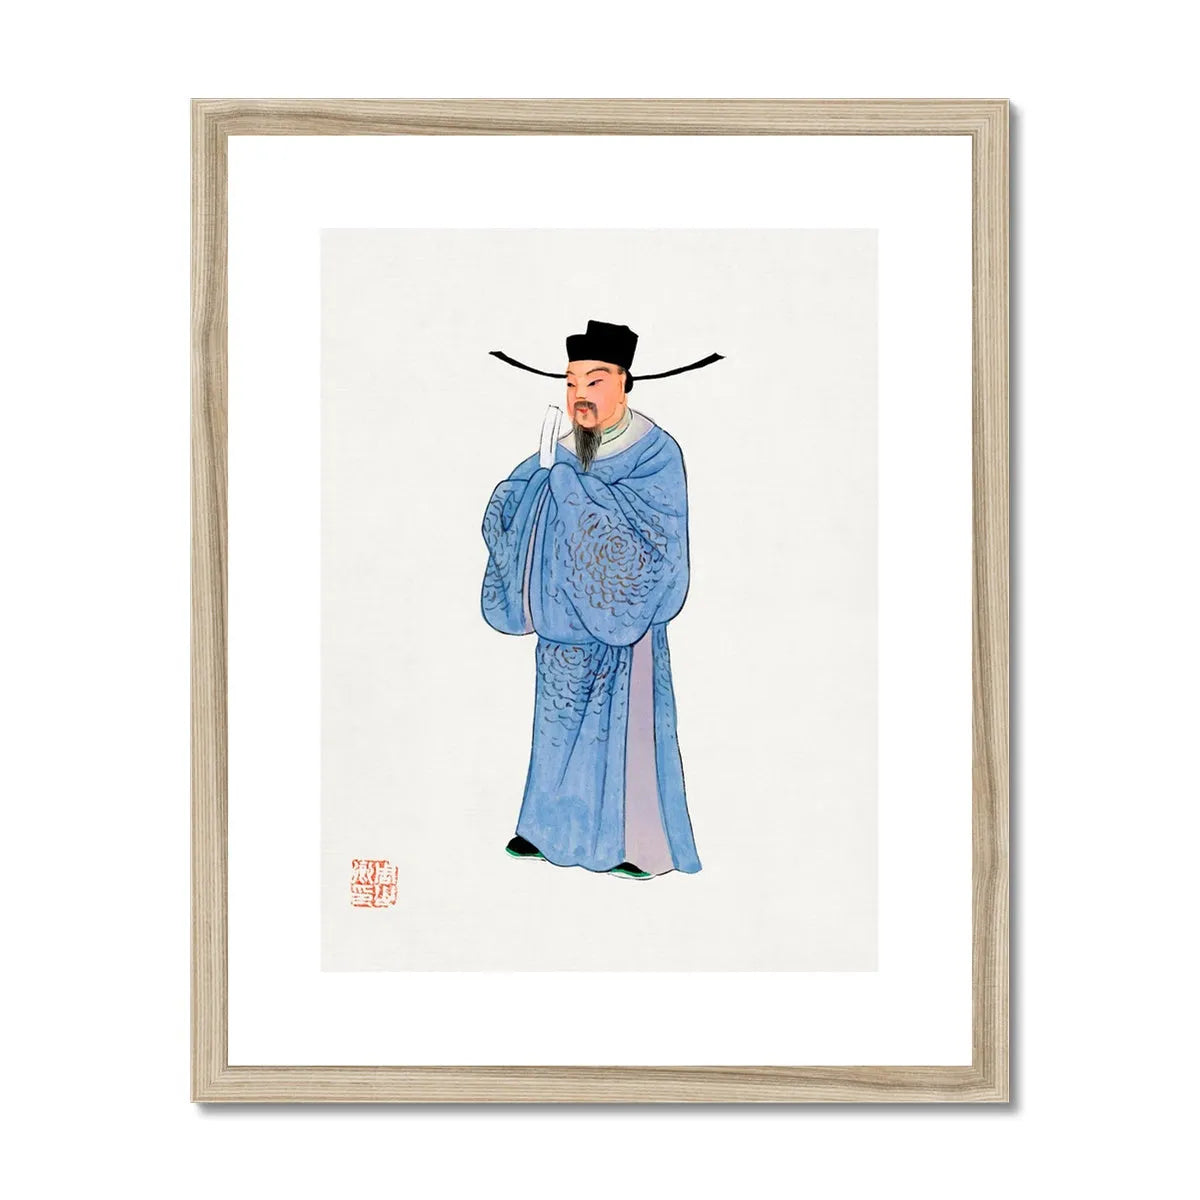 Chinese Official Framed & Mounted Print - 16’x20’ / Natural Frame - Posters Prints & Visual Artwork - Aesthetic Art